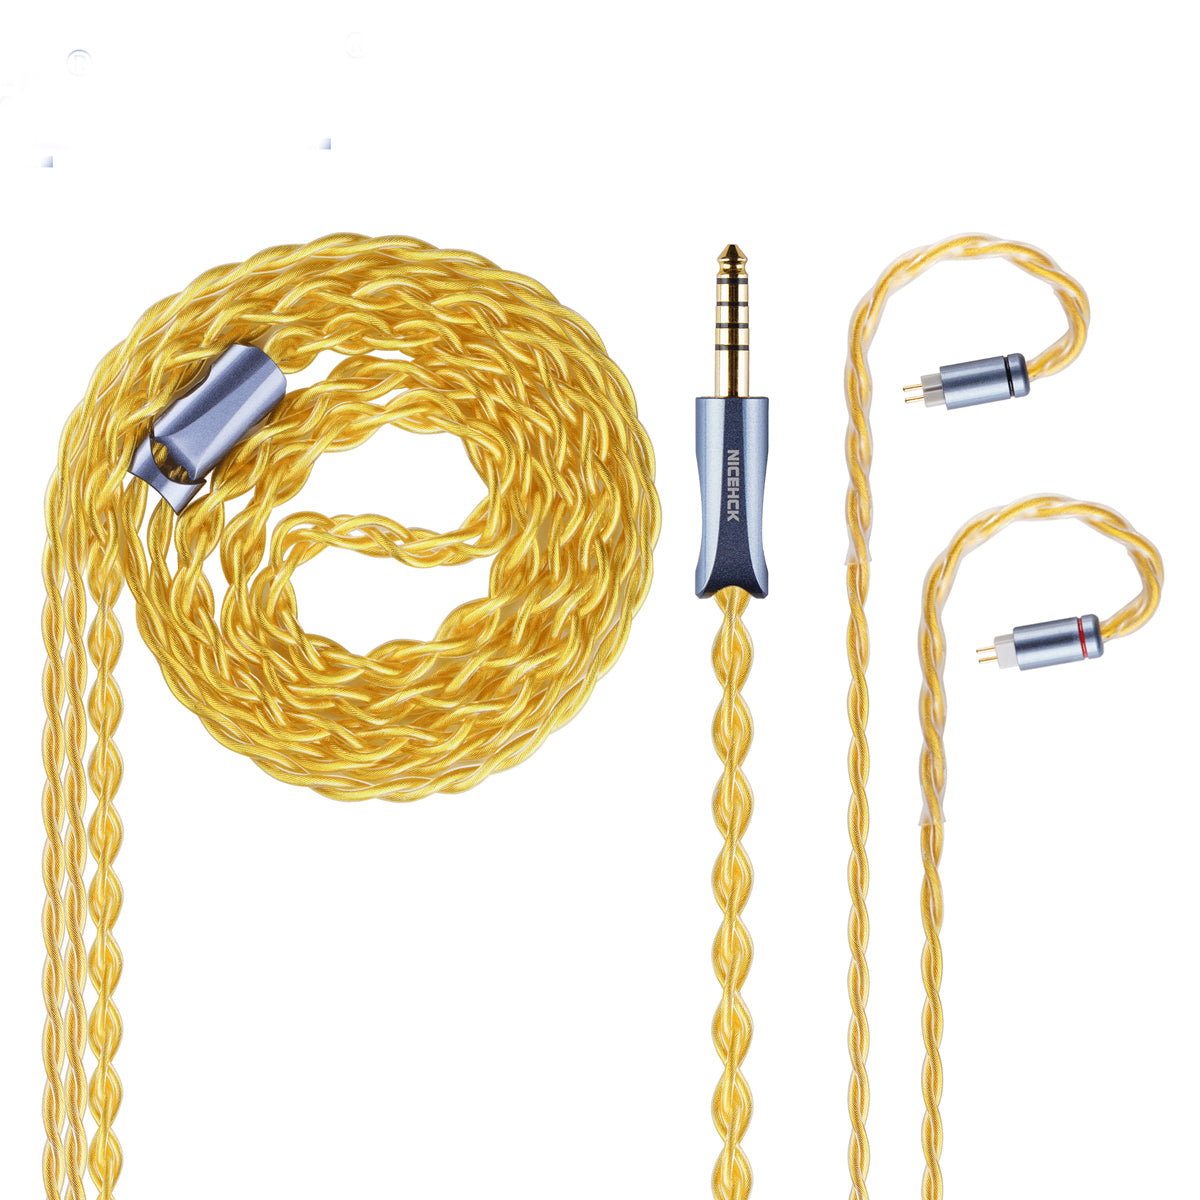 NICEHCK AuKing Flagship 7N OCC 4N Gold Plated HiFi Earphone Cable